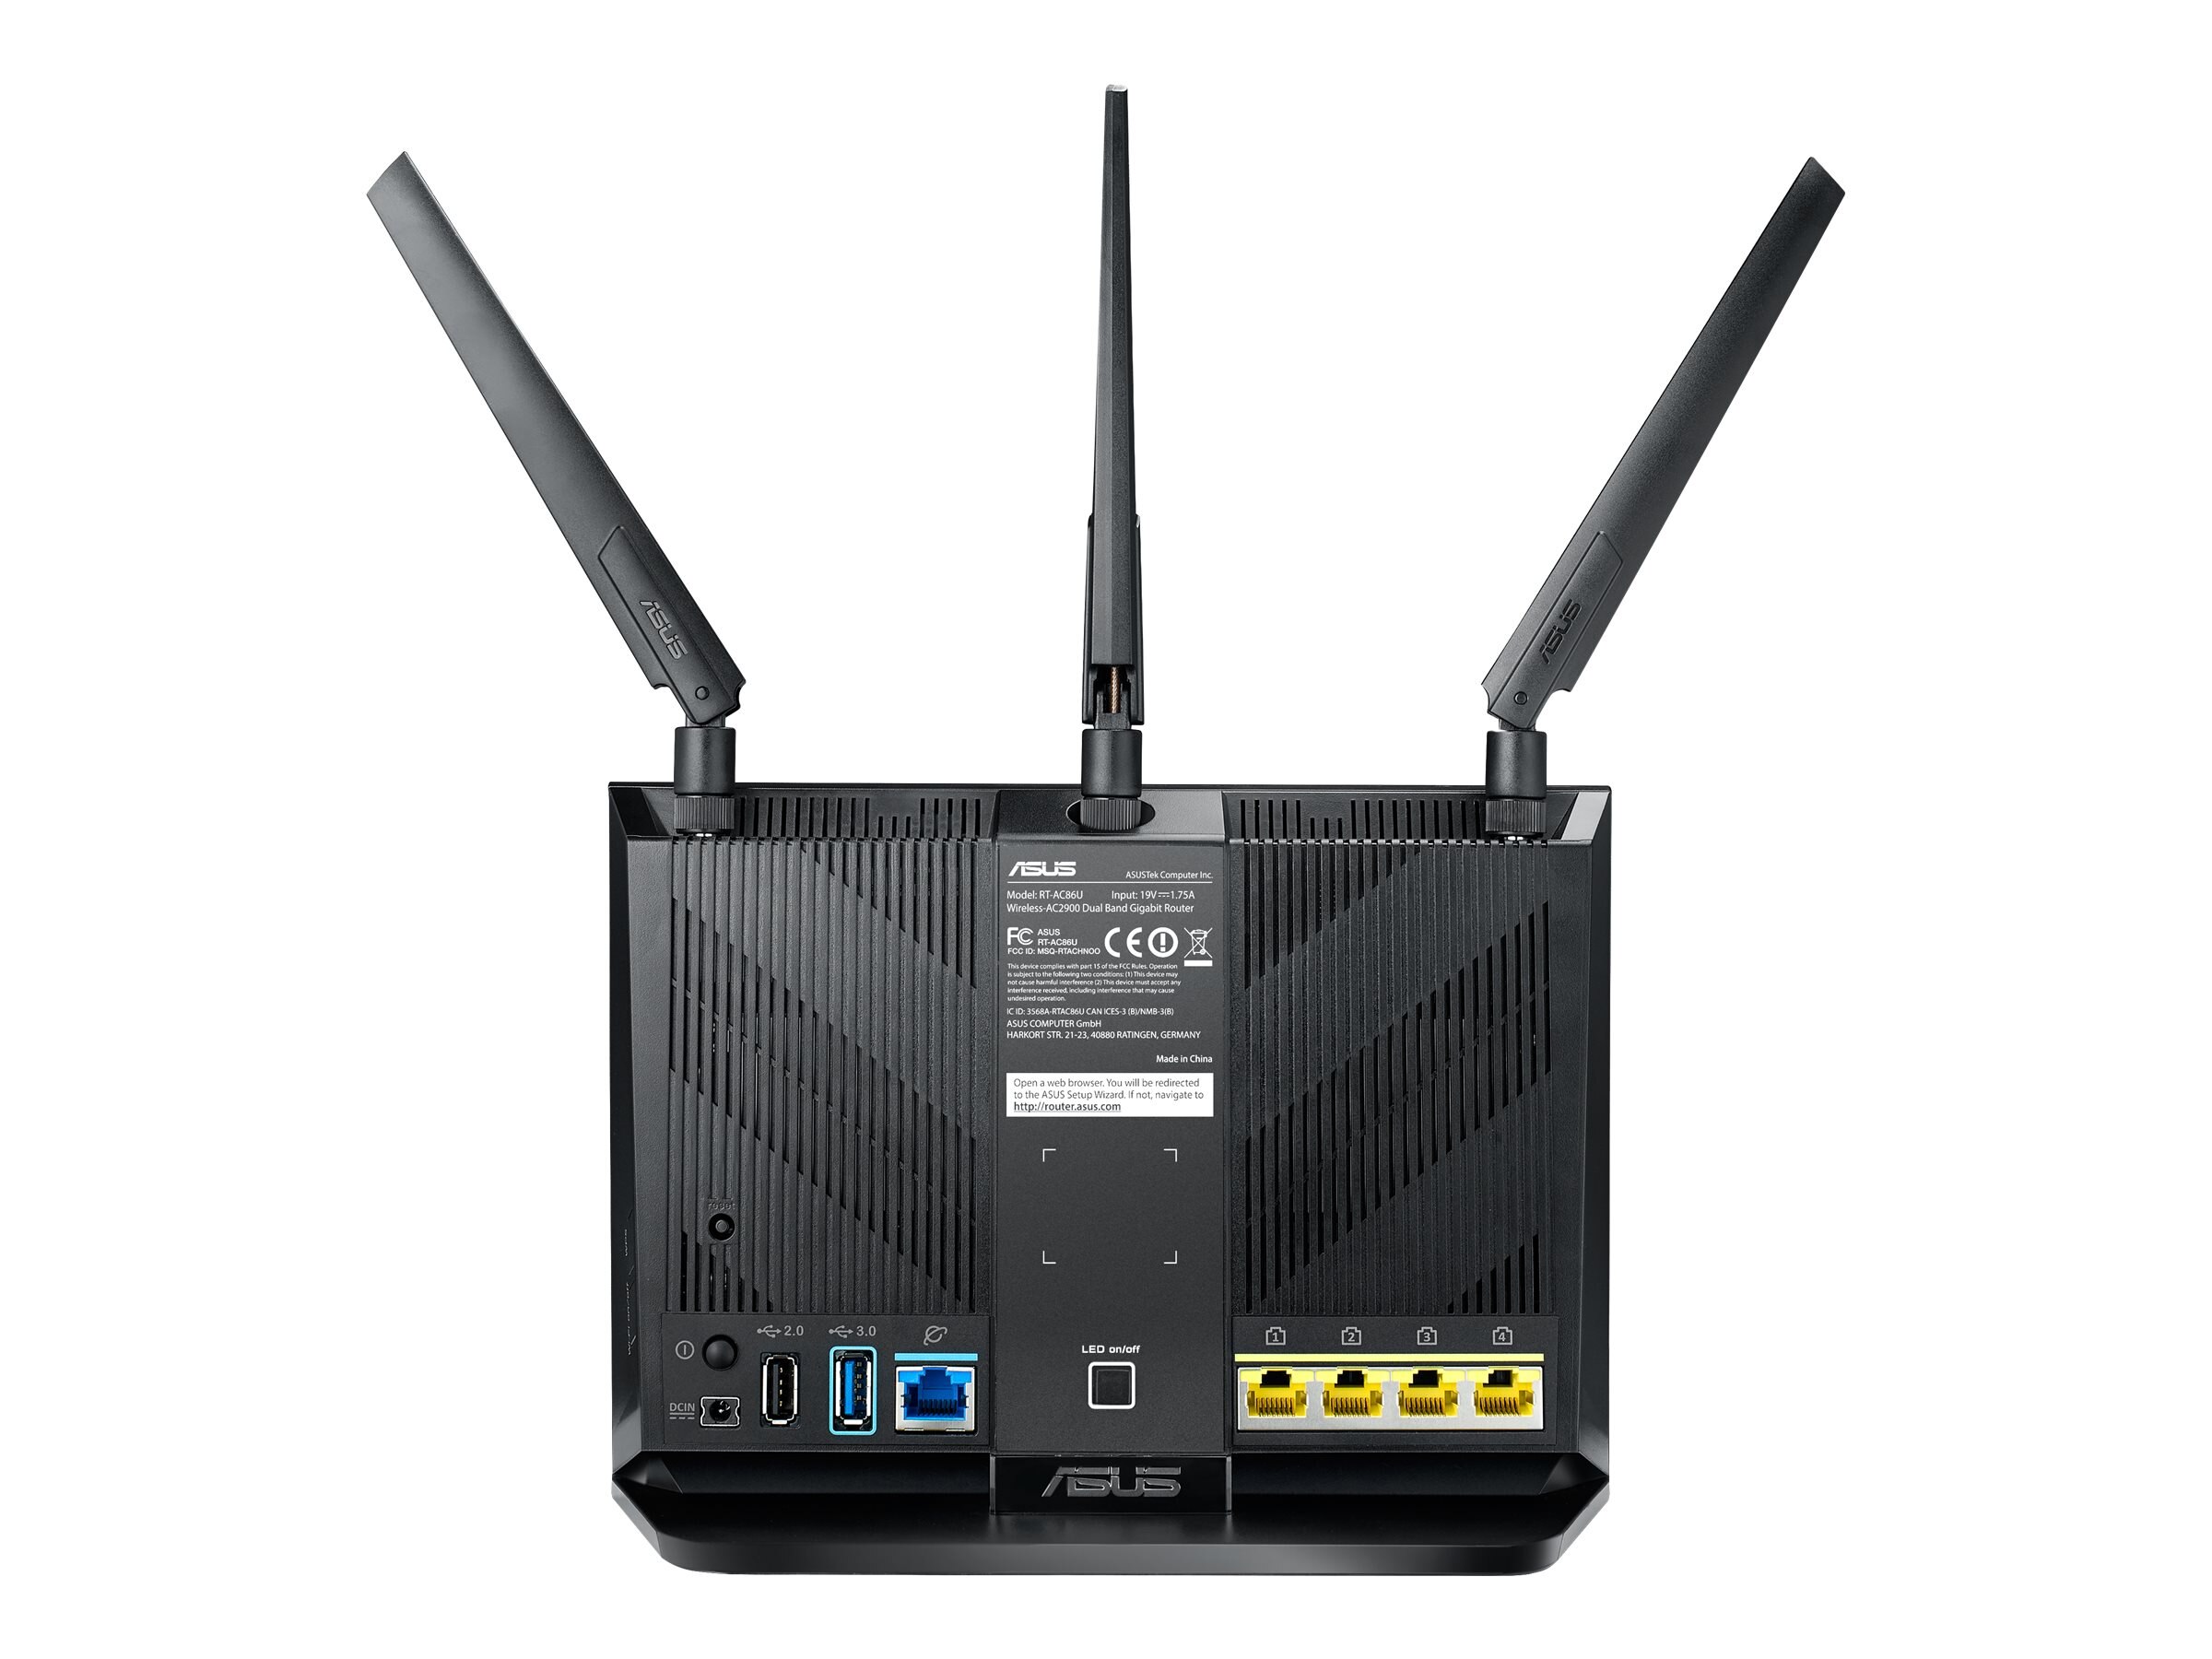 lift Scully Doctor Asus AC2900 Wireless Router w 4-Port GbE LAN, USB 3.1 (RT-AC86U)